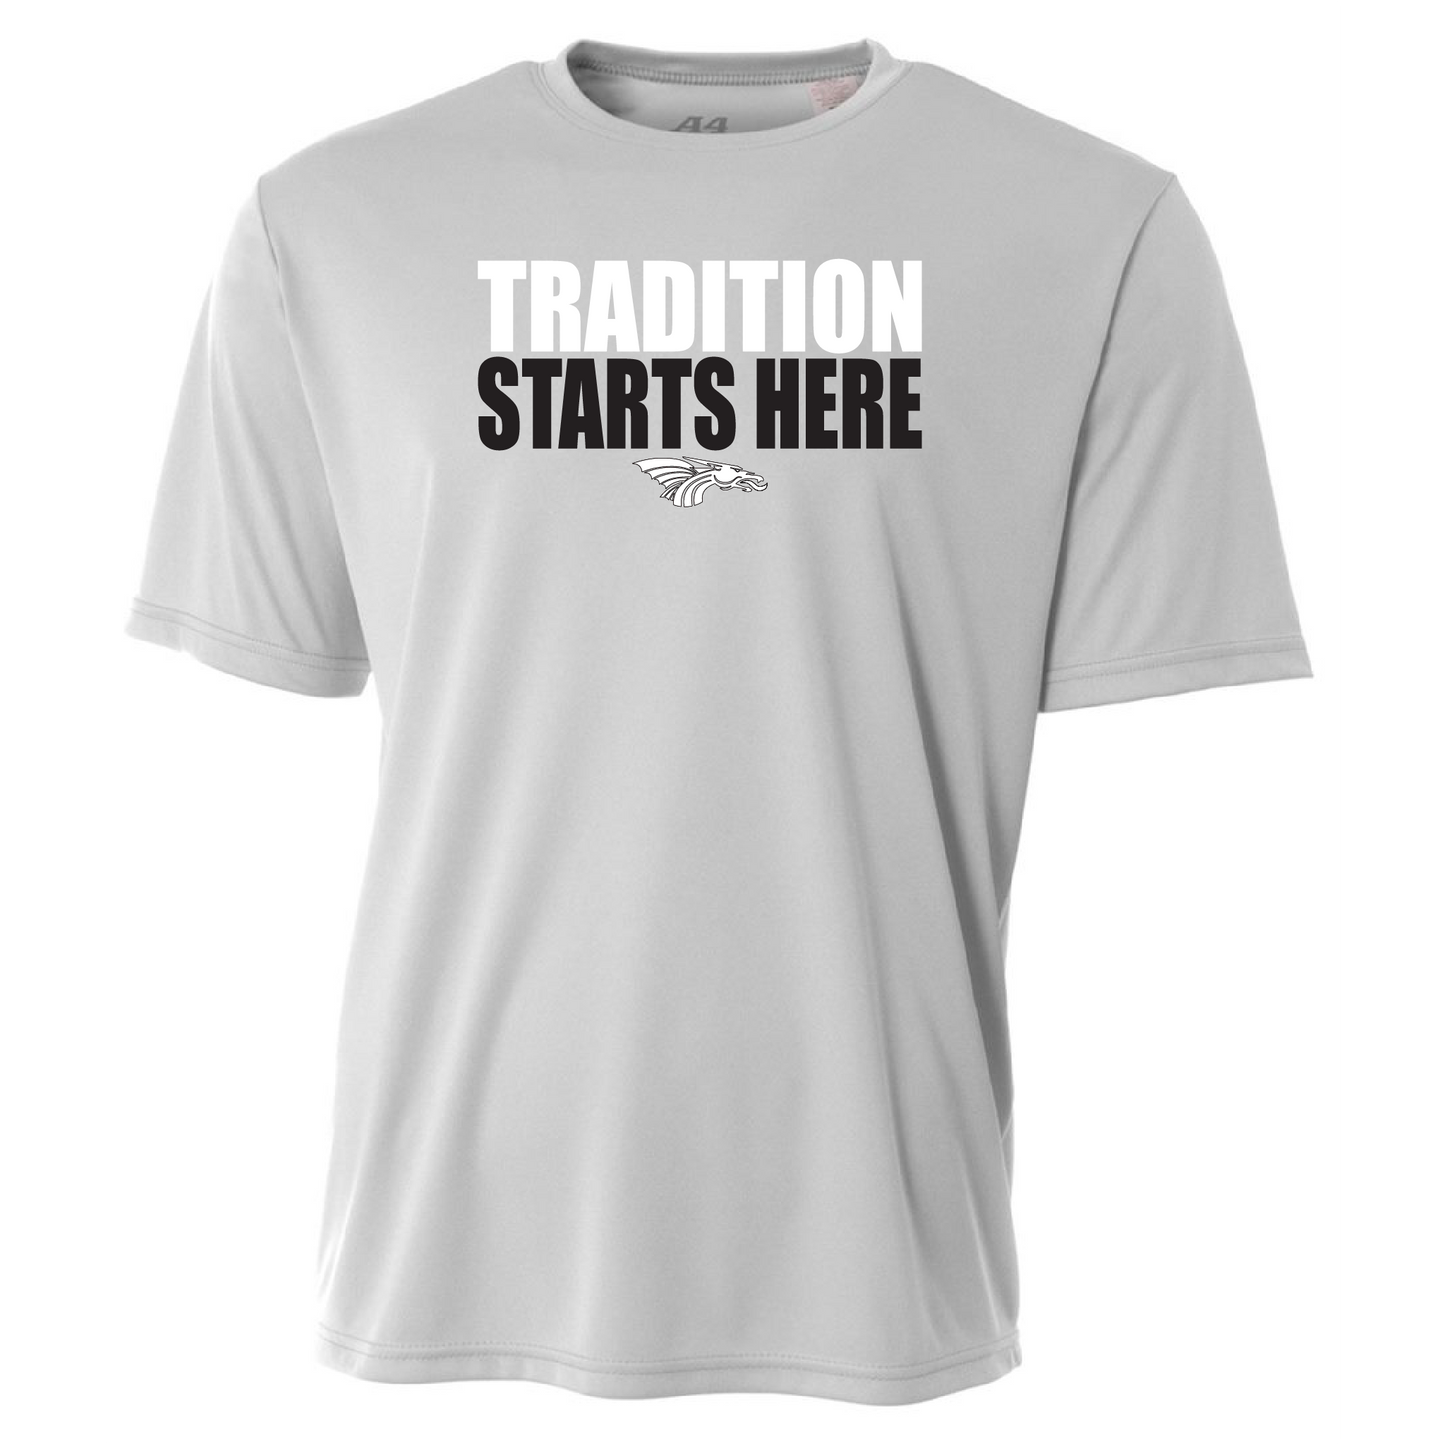 Mens S/S T-Shirt - Tradition Starts Here